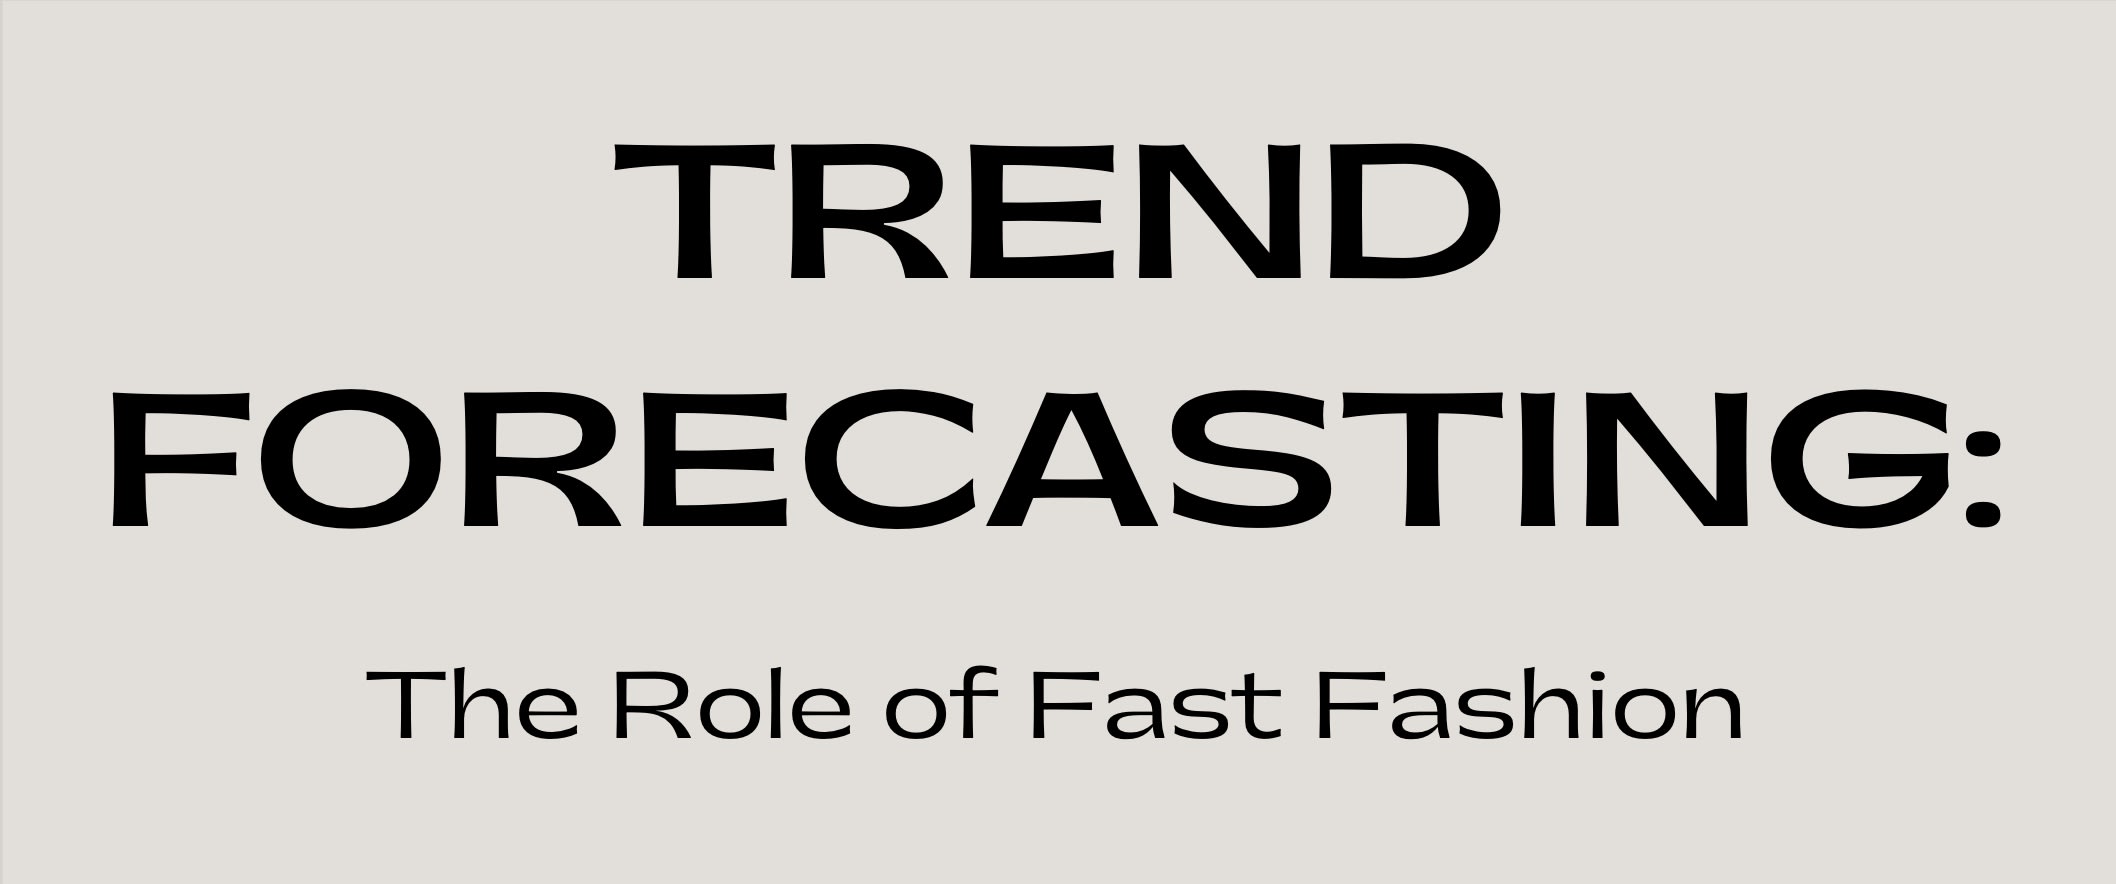 Trend Forecasting: The Role of Fast-Fashion